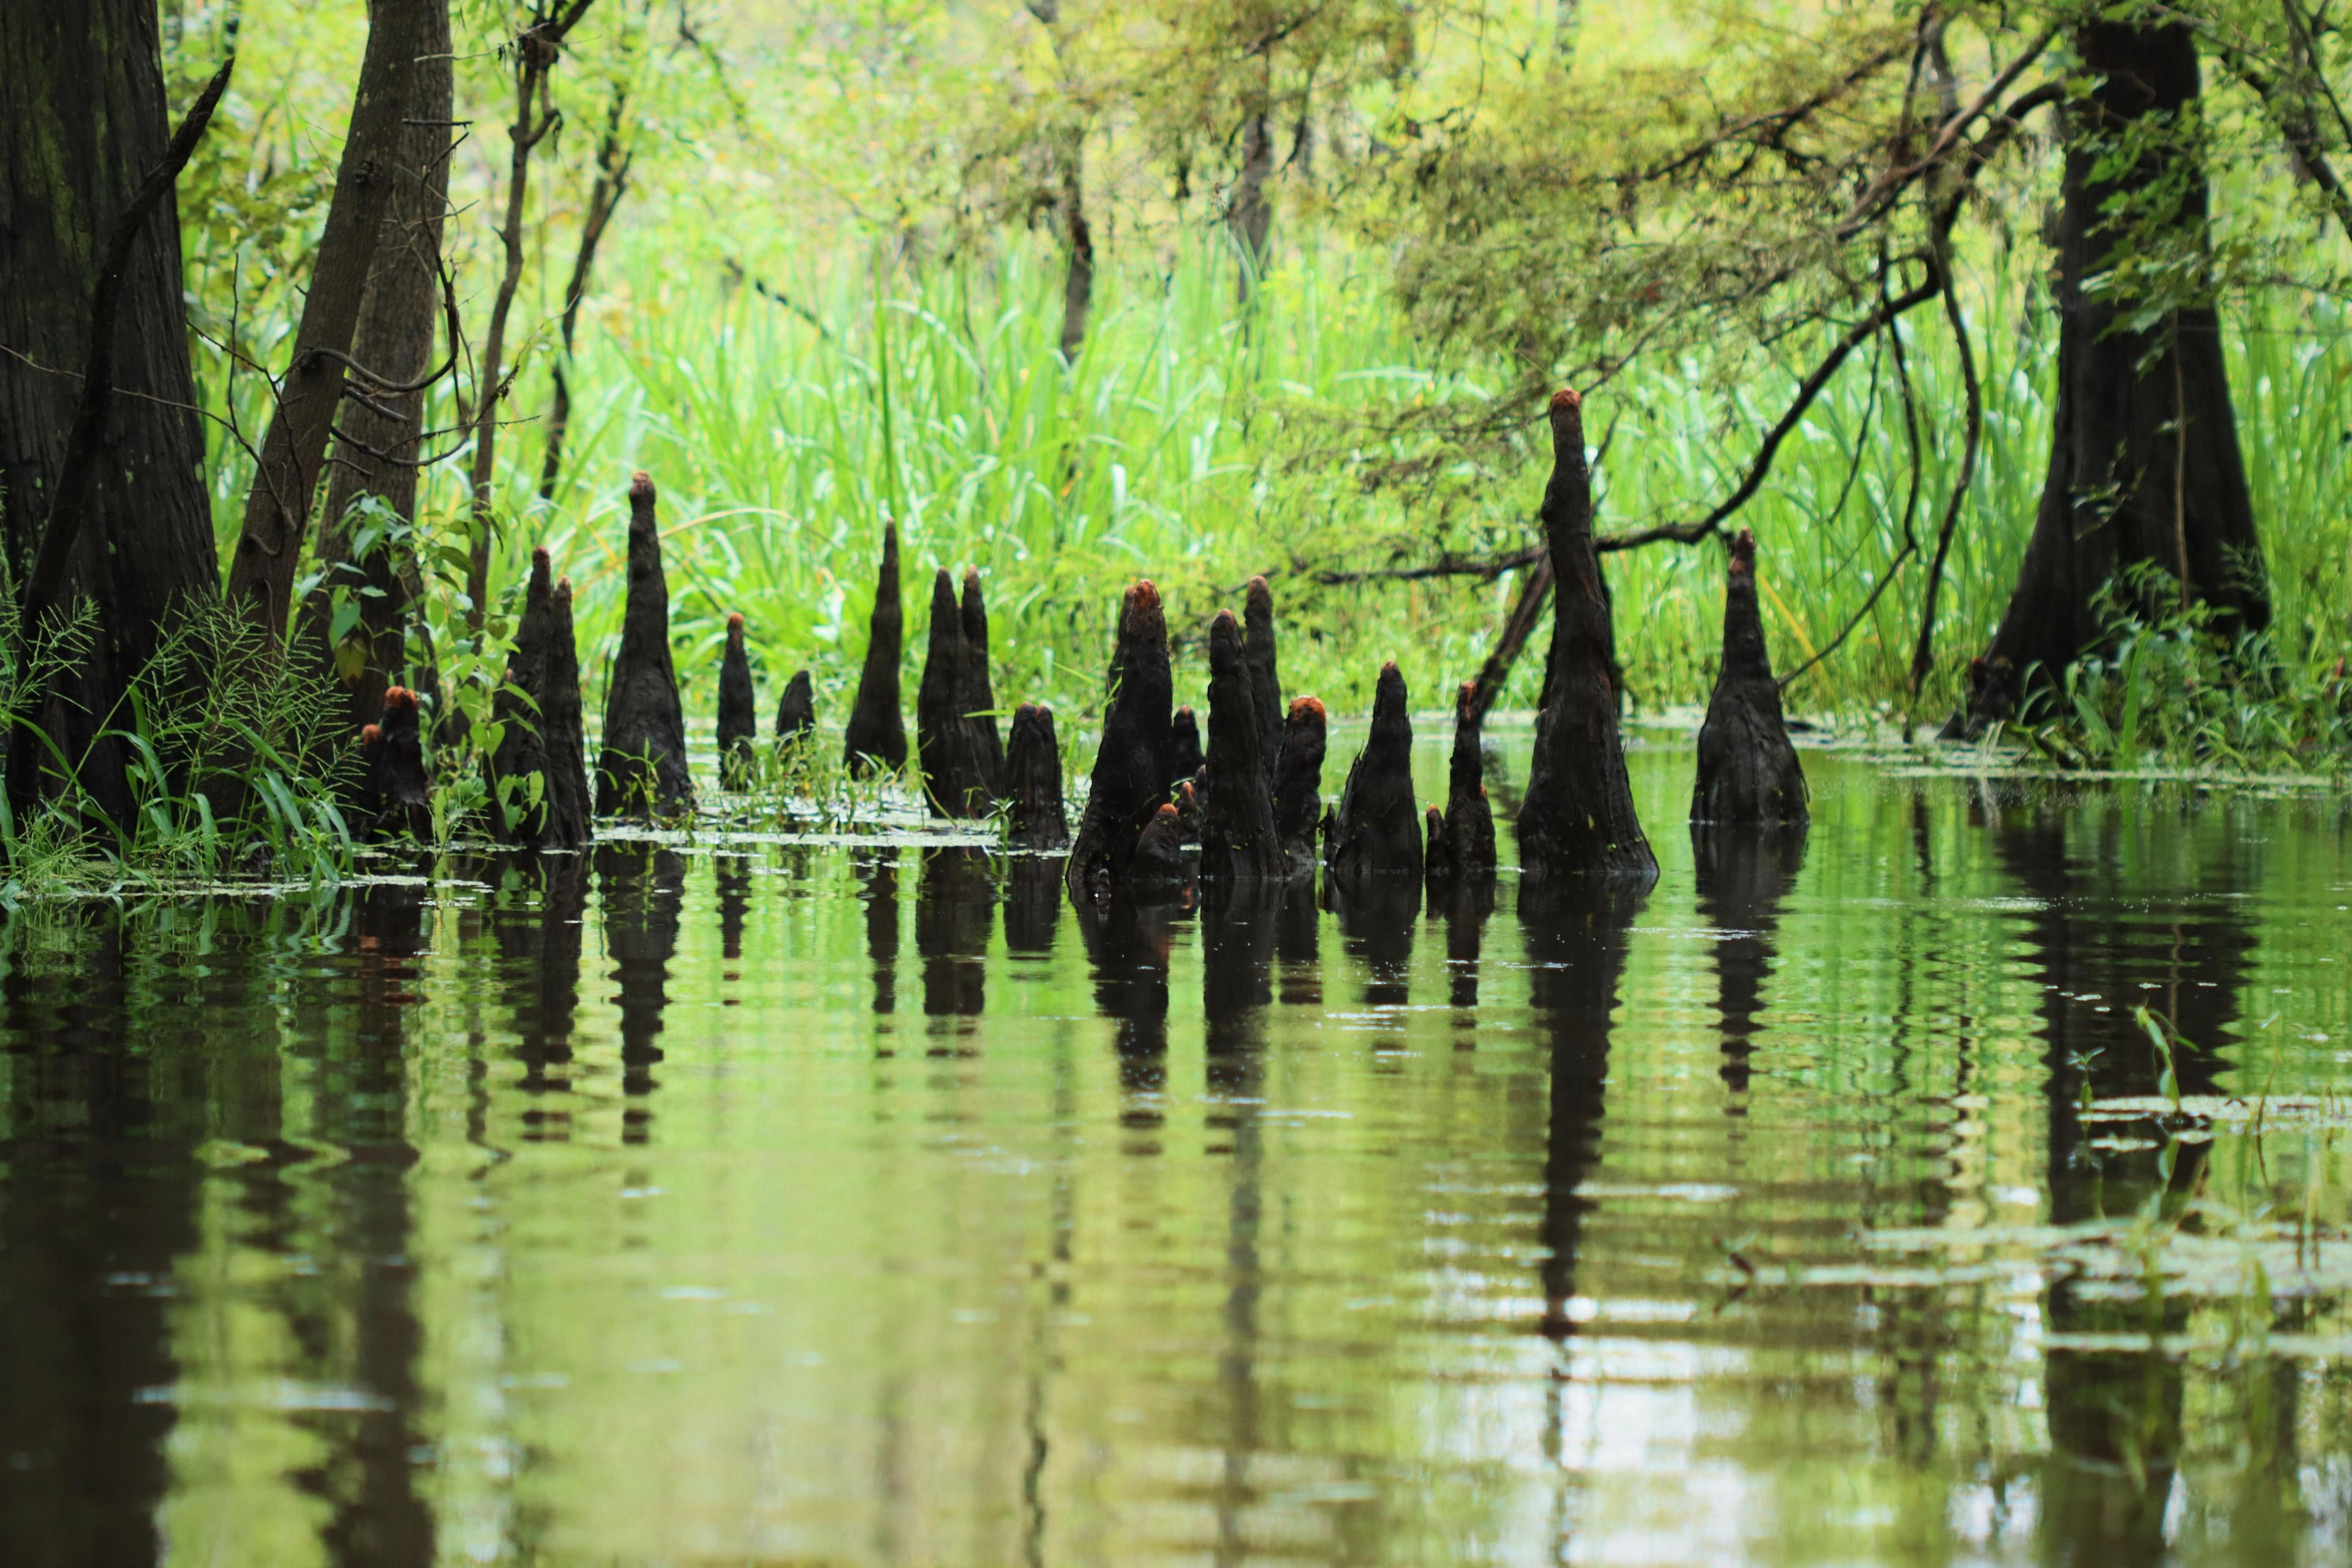 Shadowy-looking cypress knees and their reflections in still water.